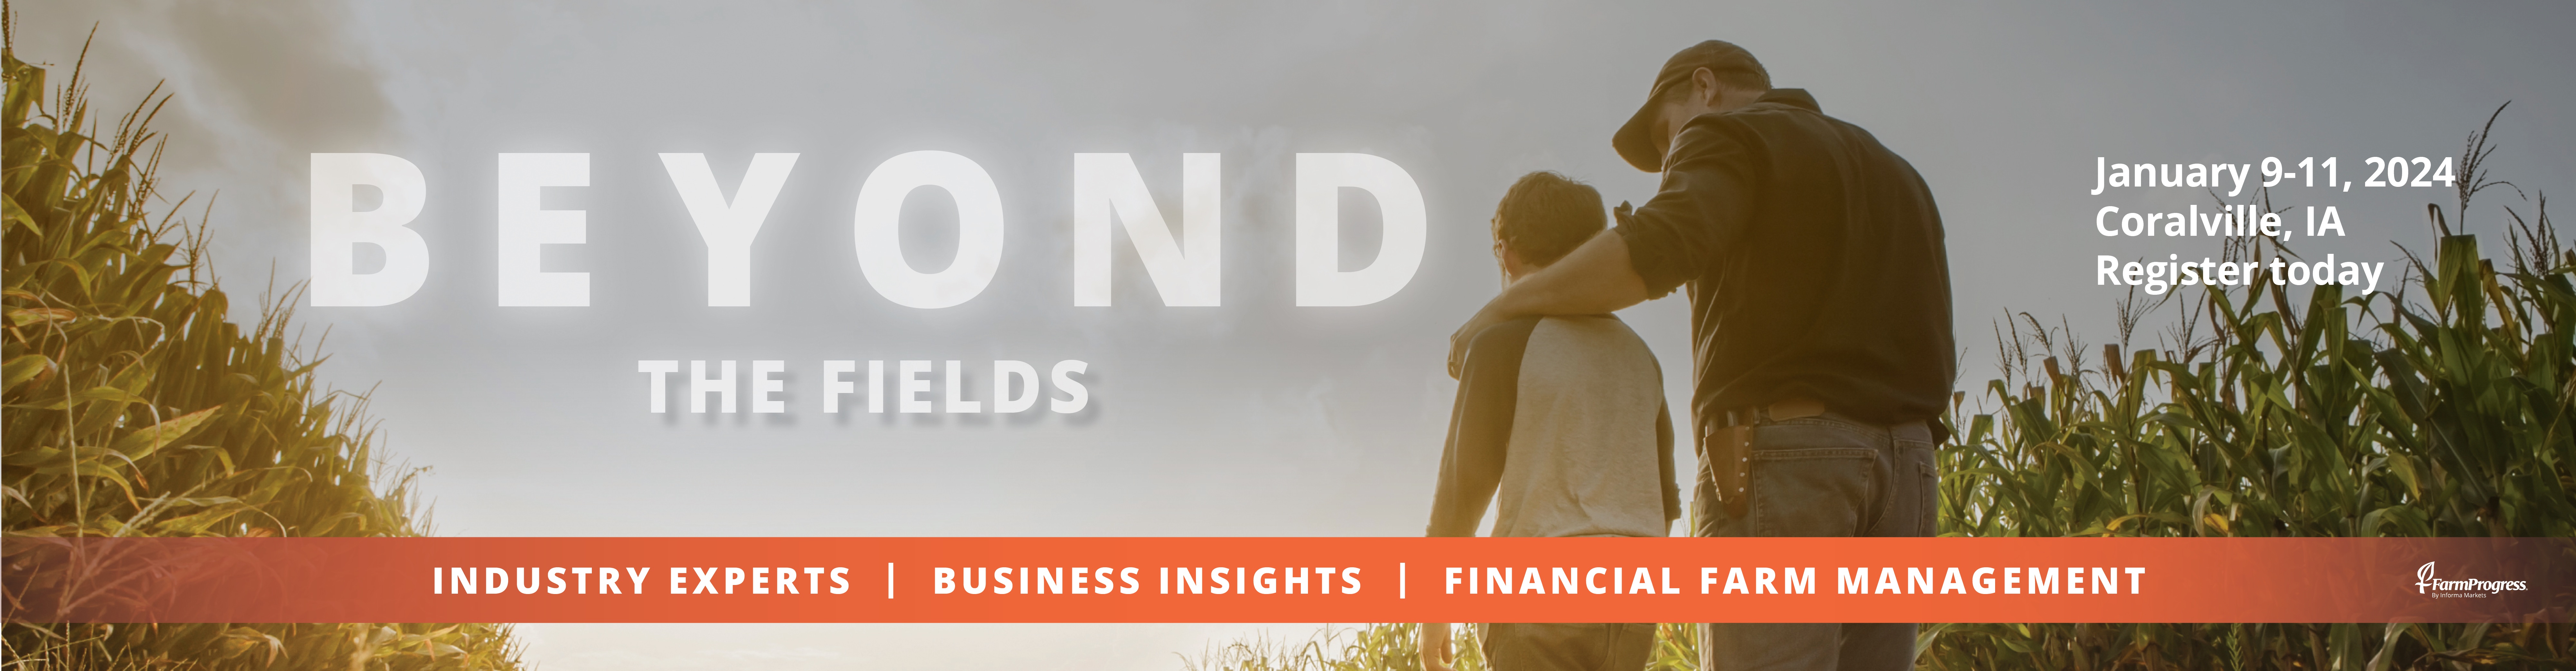 Beyond the Fields - January 9-11, 2024 Coral IA -- Industry Experts | Business Insights | Financial Farm Management